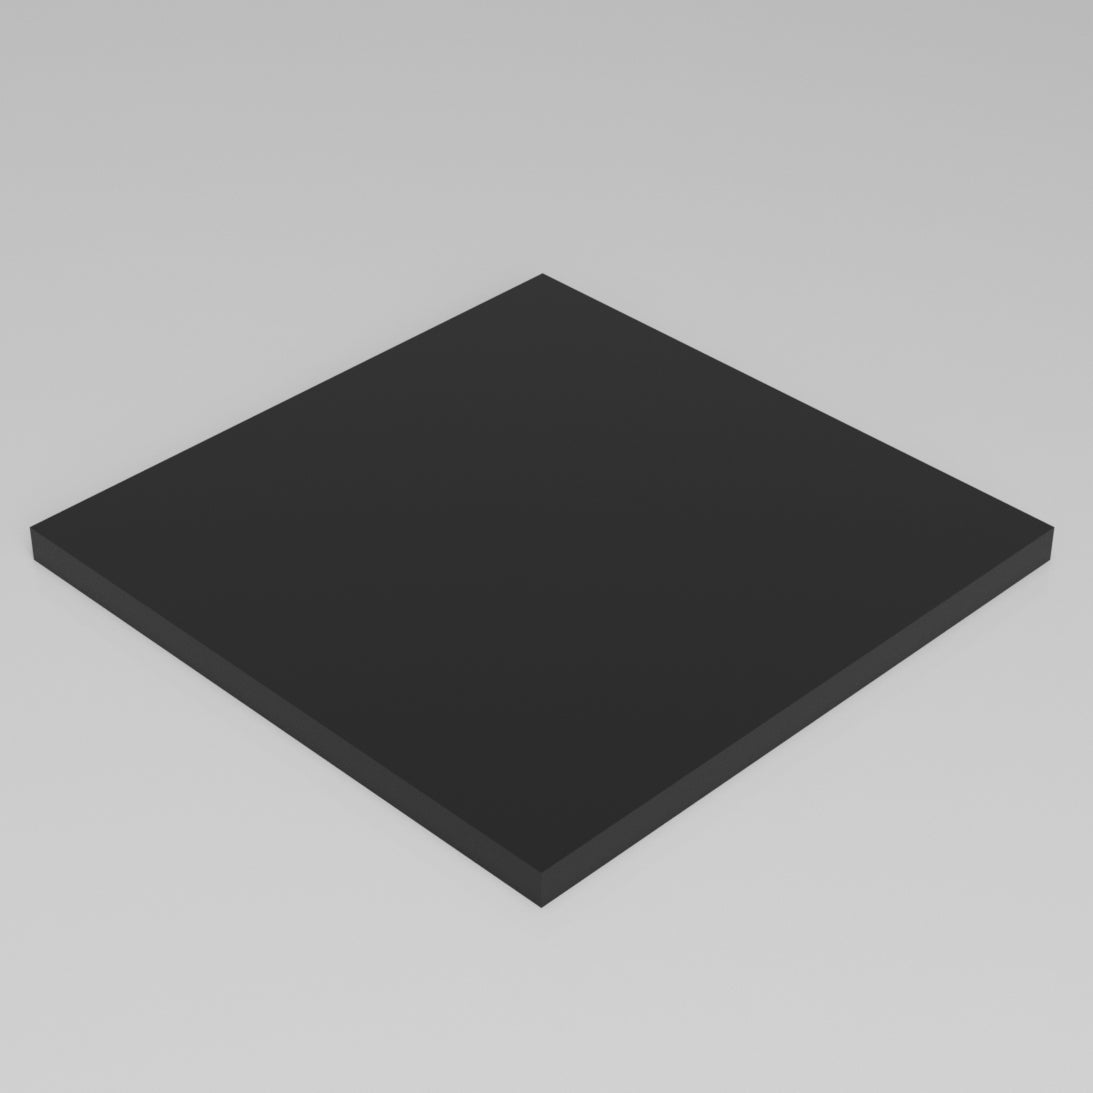 Machinable Wax Rectangular Block Front View 1 Inch by 18 Inch by 18 Inch